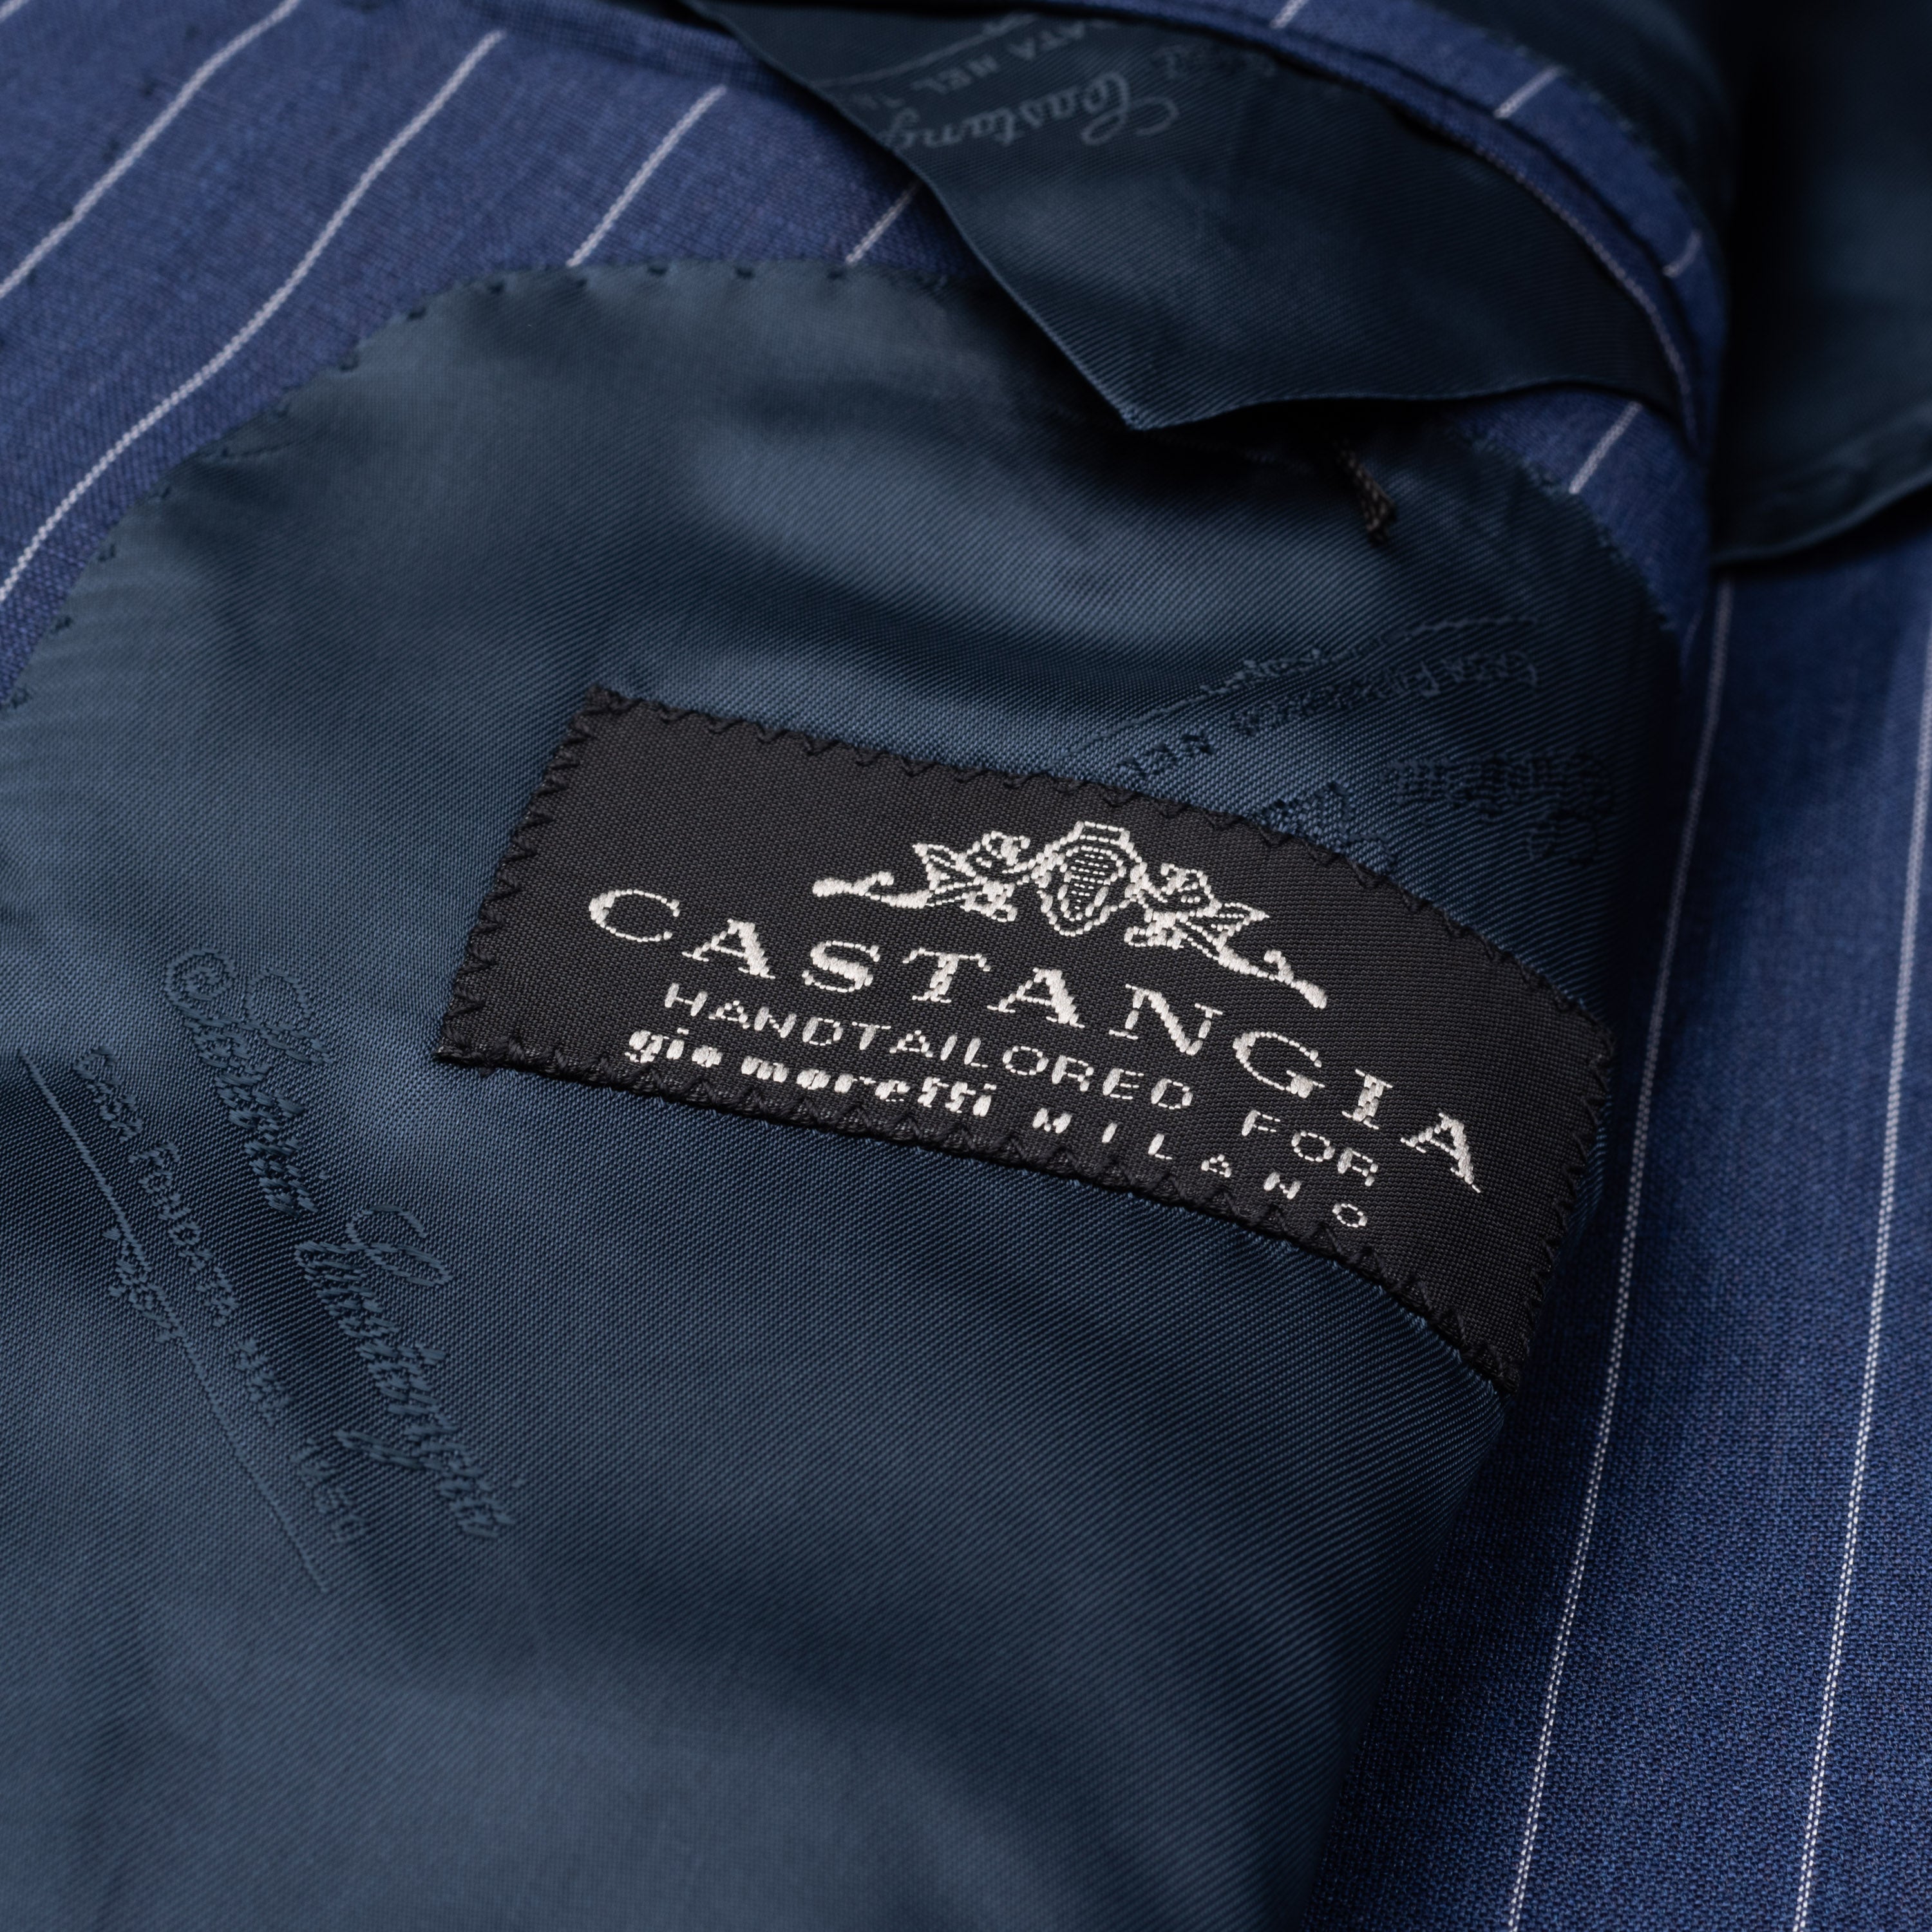 CASTANGIA 1850 Blue Striped Wool-Linen Suit with Leather Trims EU 50 NEW US 40